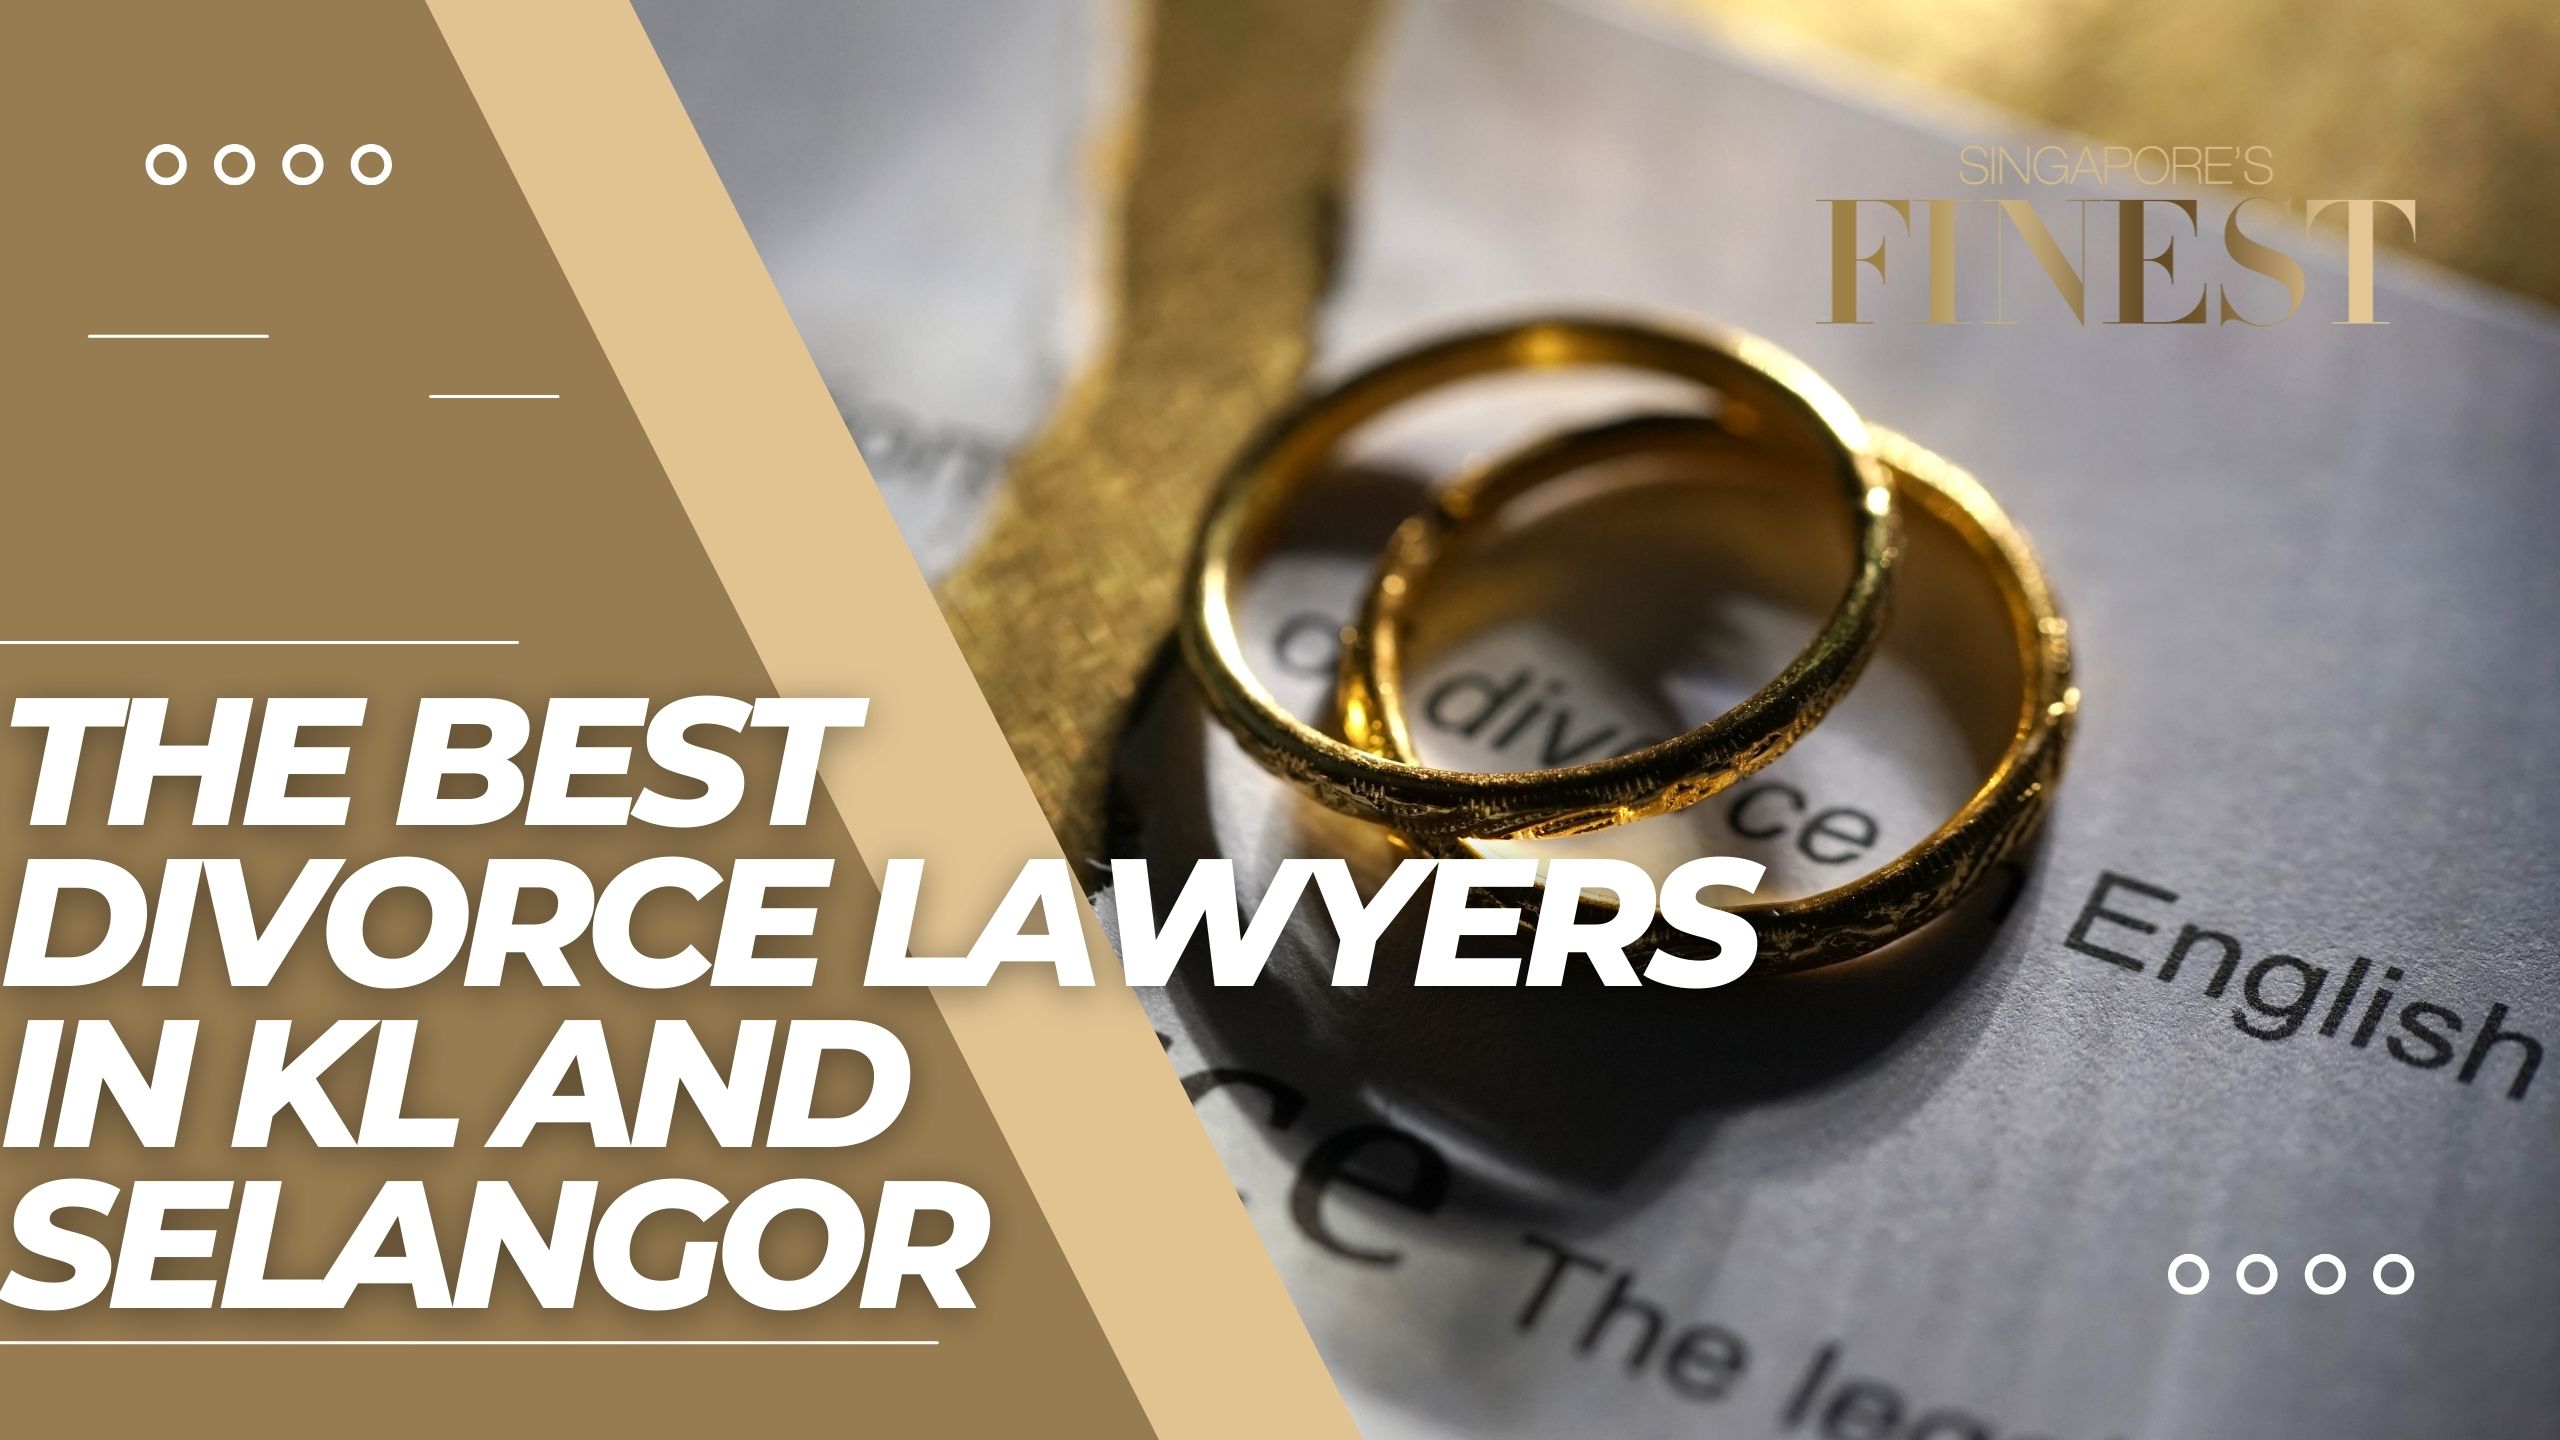 The Finest Divorce Lawyers in KL and Selangor